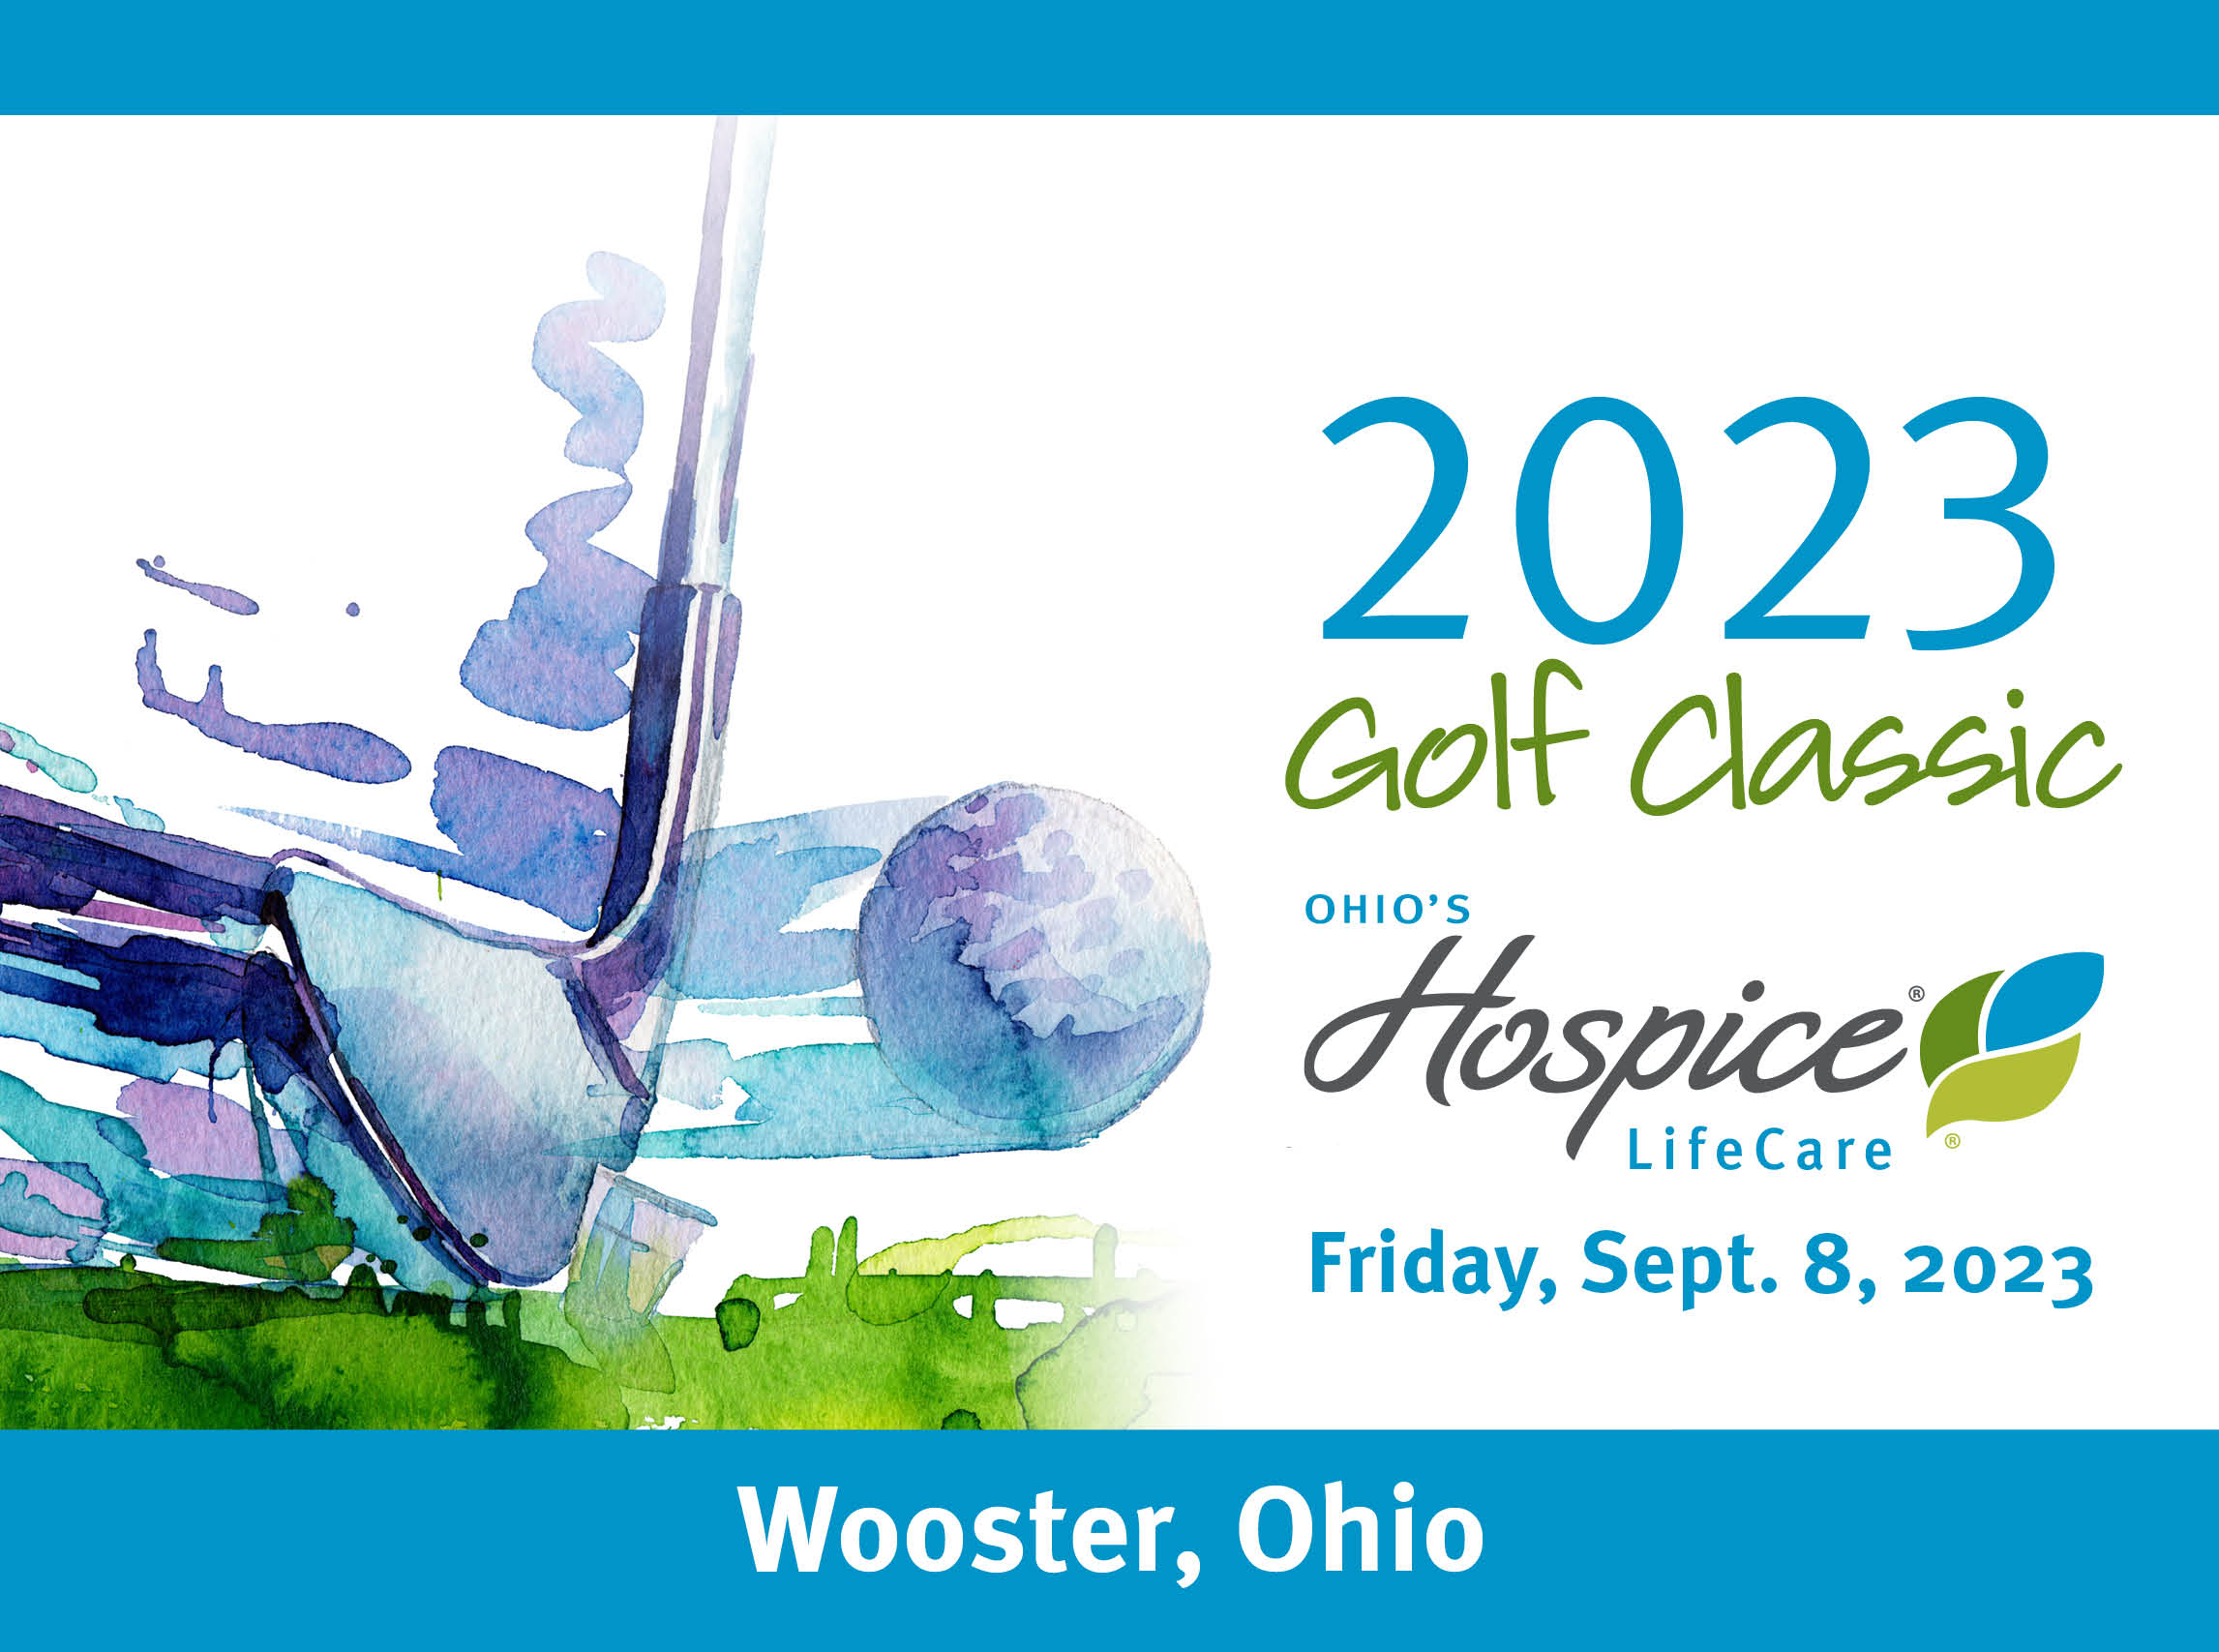 2023 Golf Classic Ohio's Hospice LifeCare Friday, September 8, 2023 Wooster, Ohio